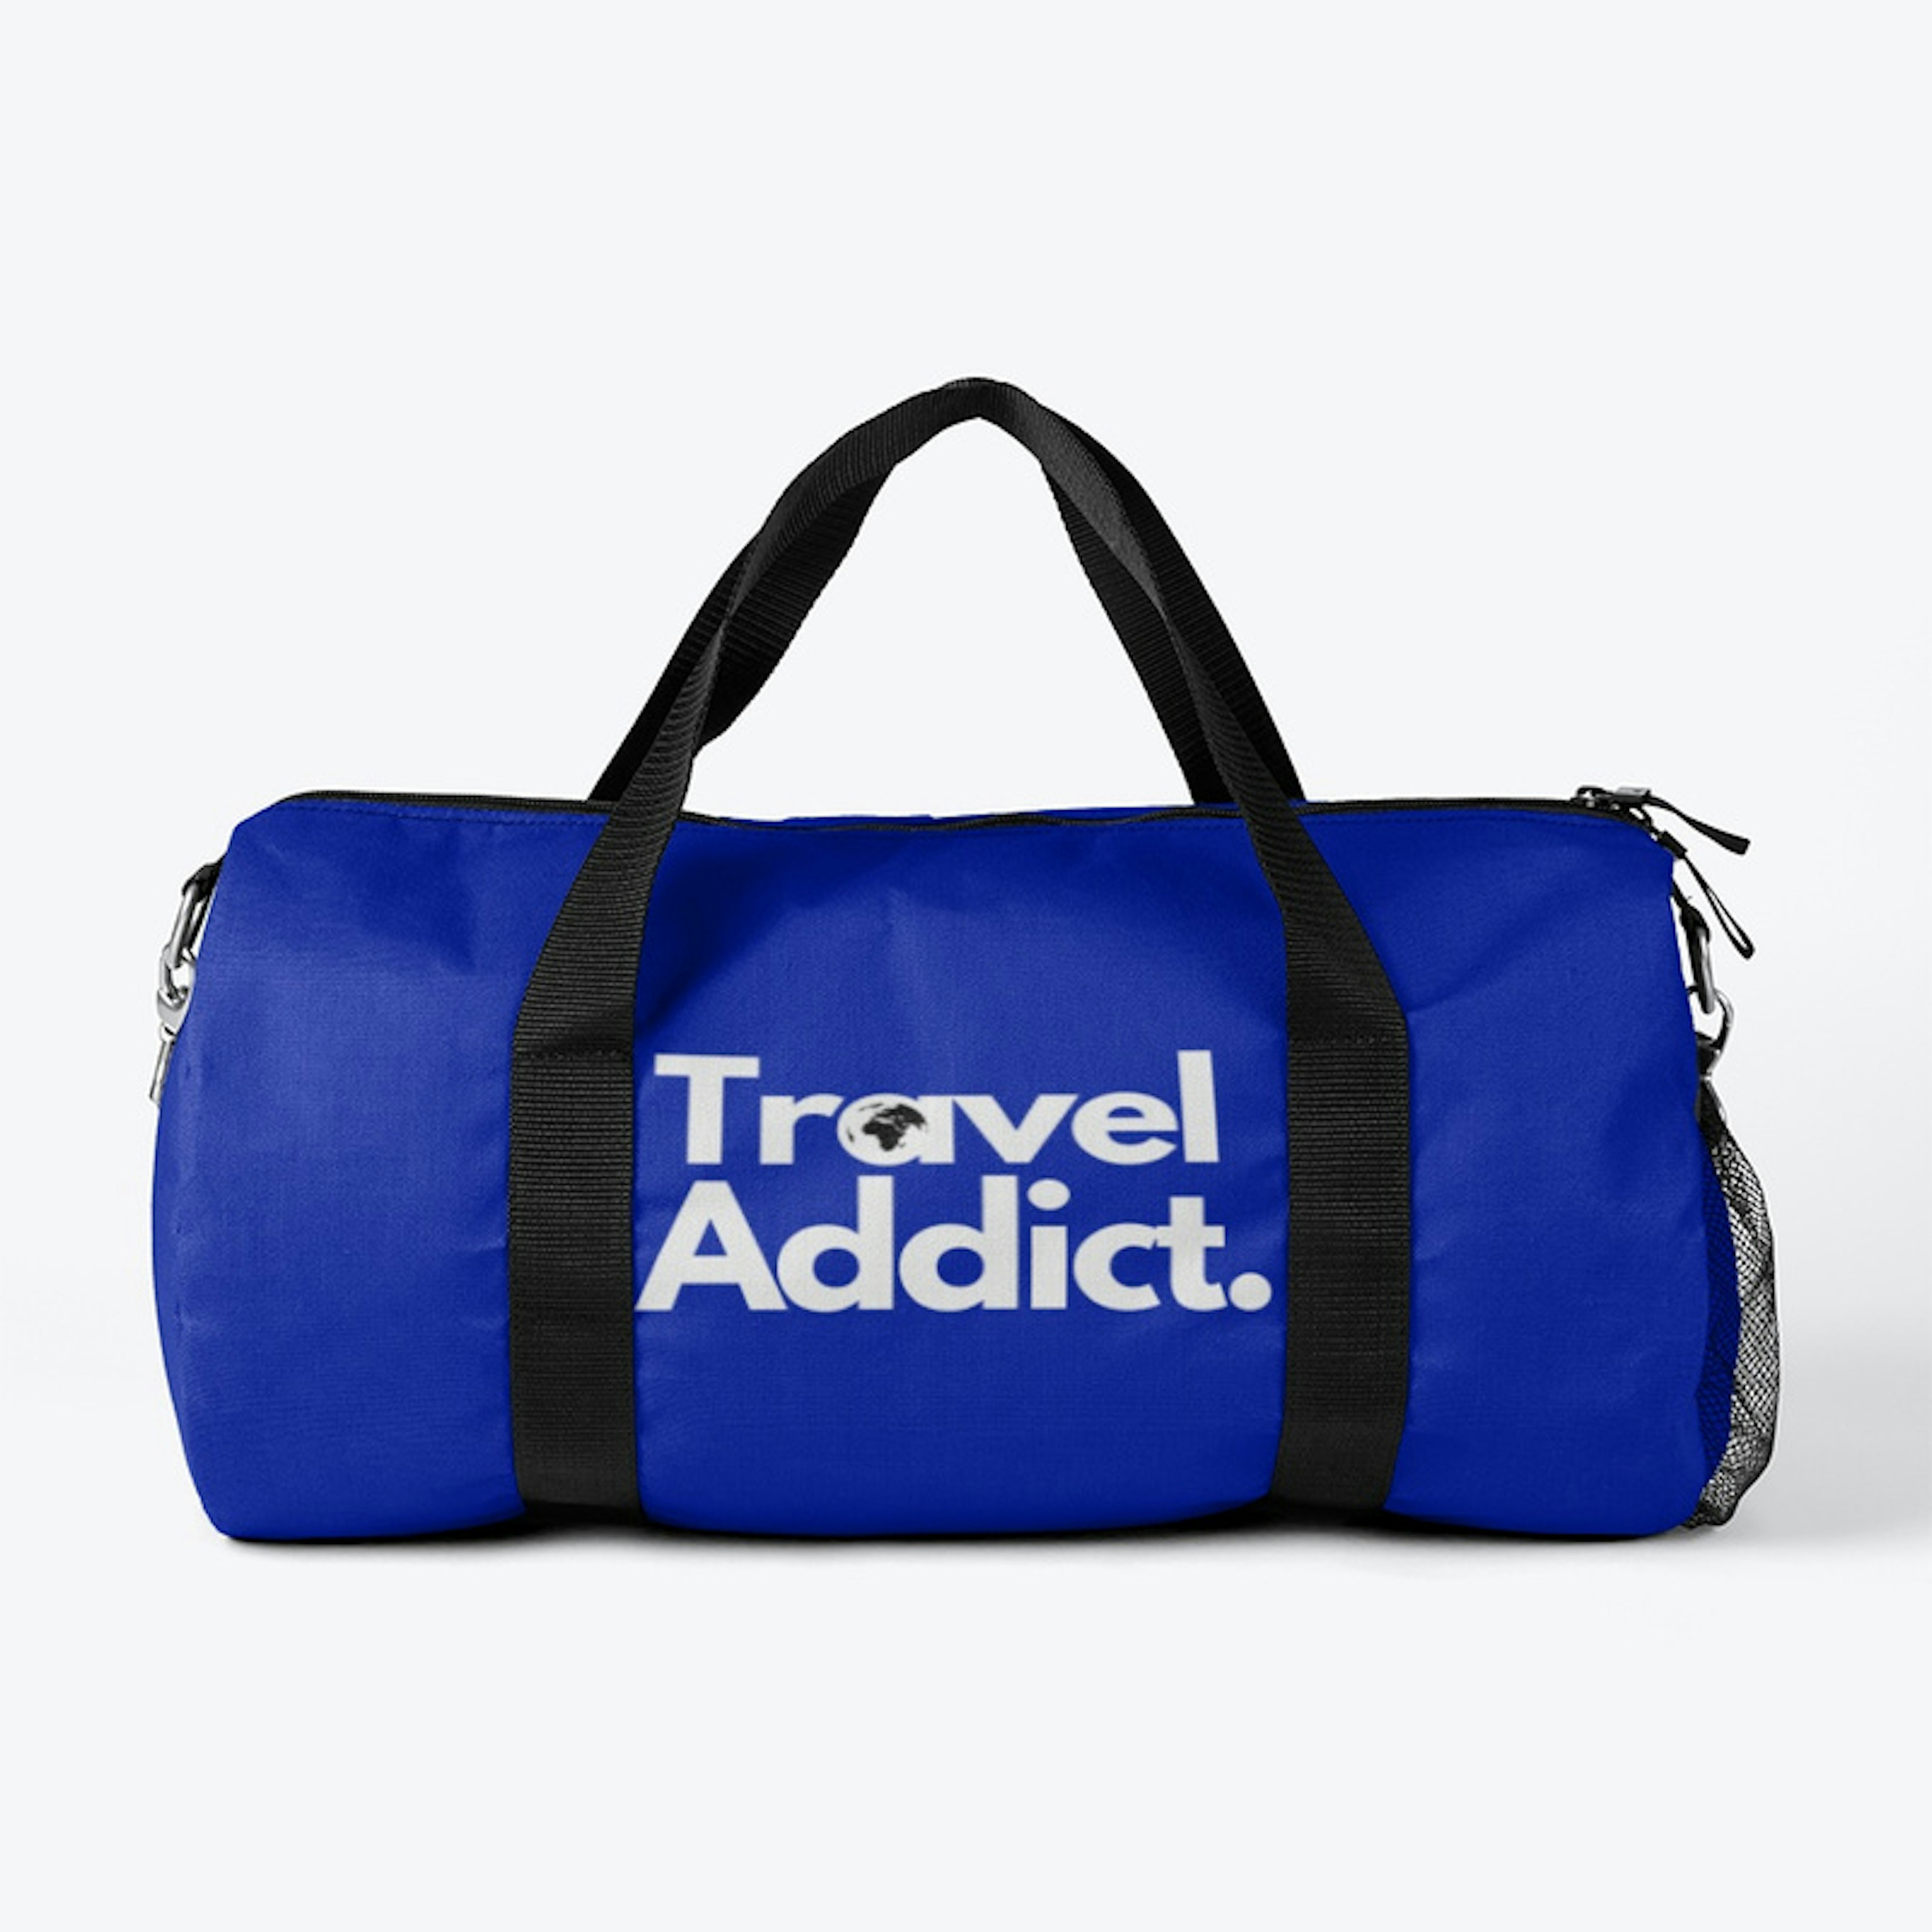 Travel Addict! Carry-on Duffle Bag 